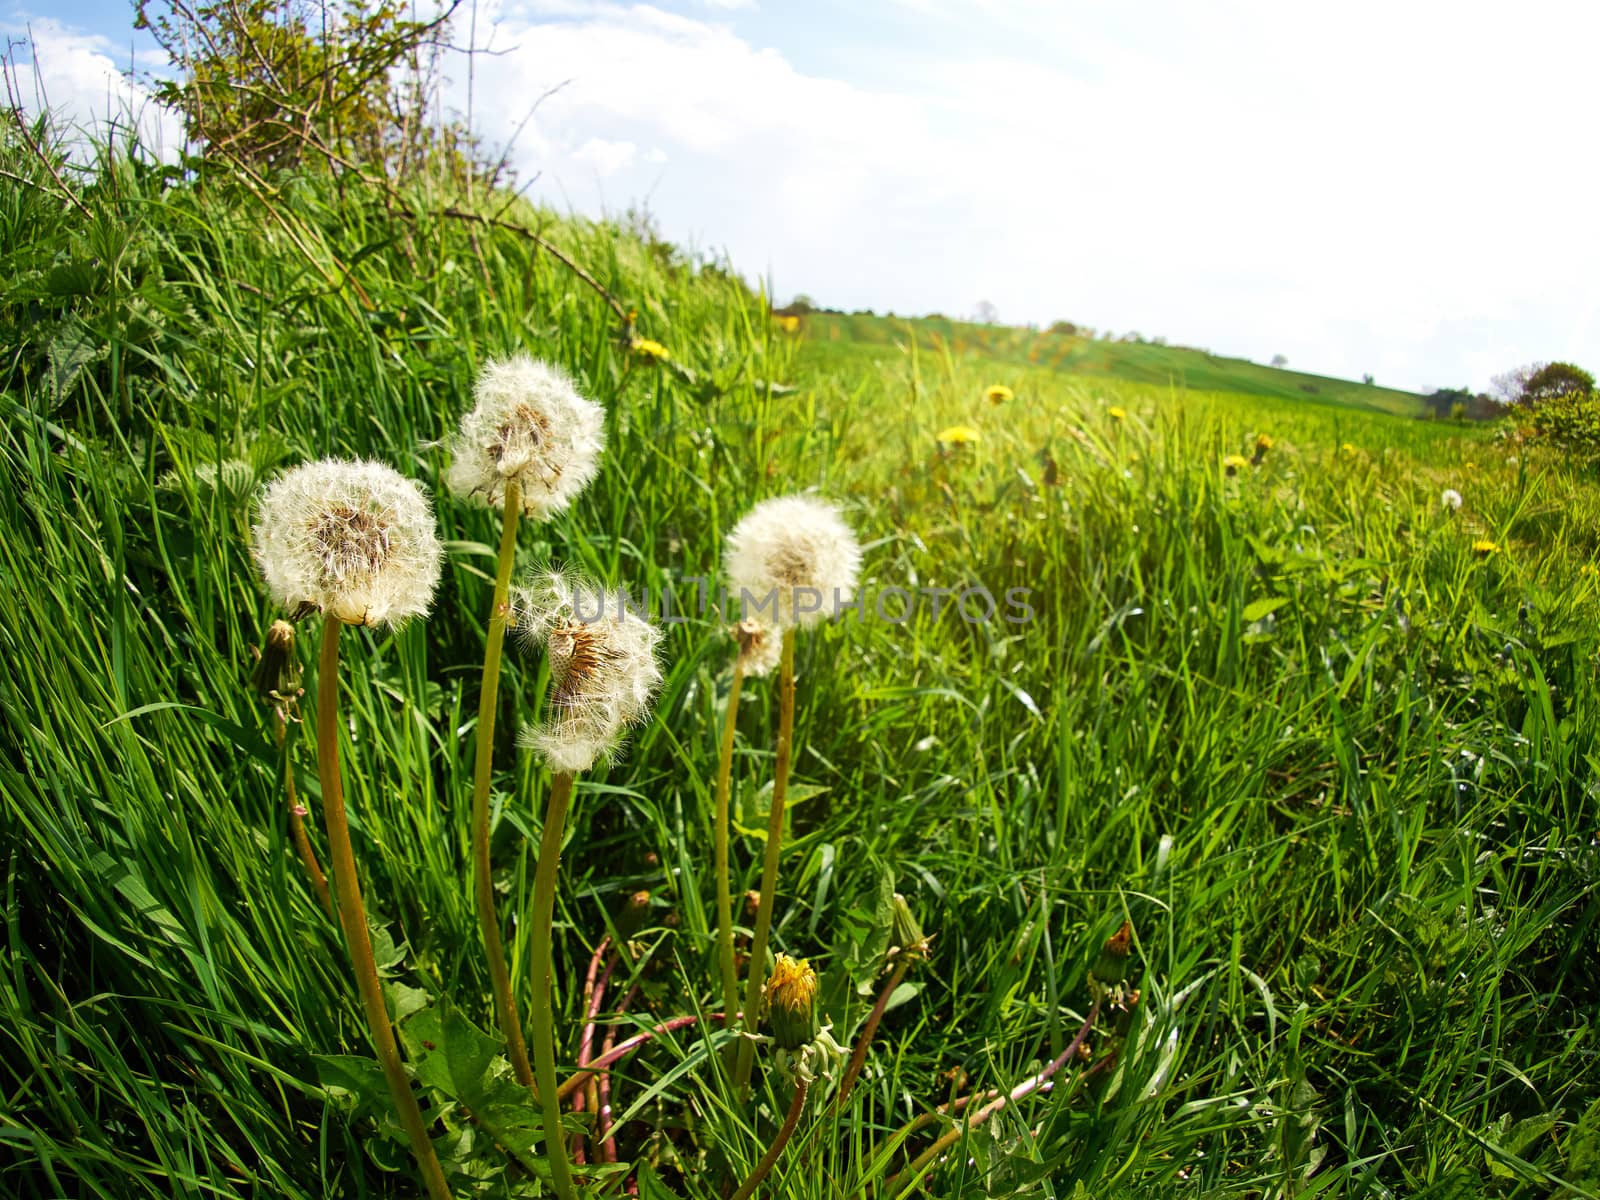 Dandelion seeds in a green field by Ronyzmbow